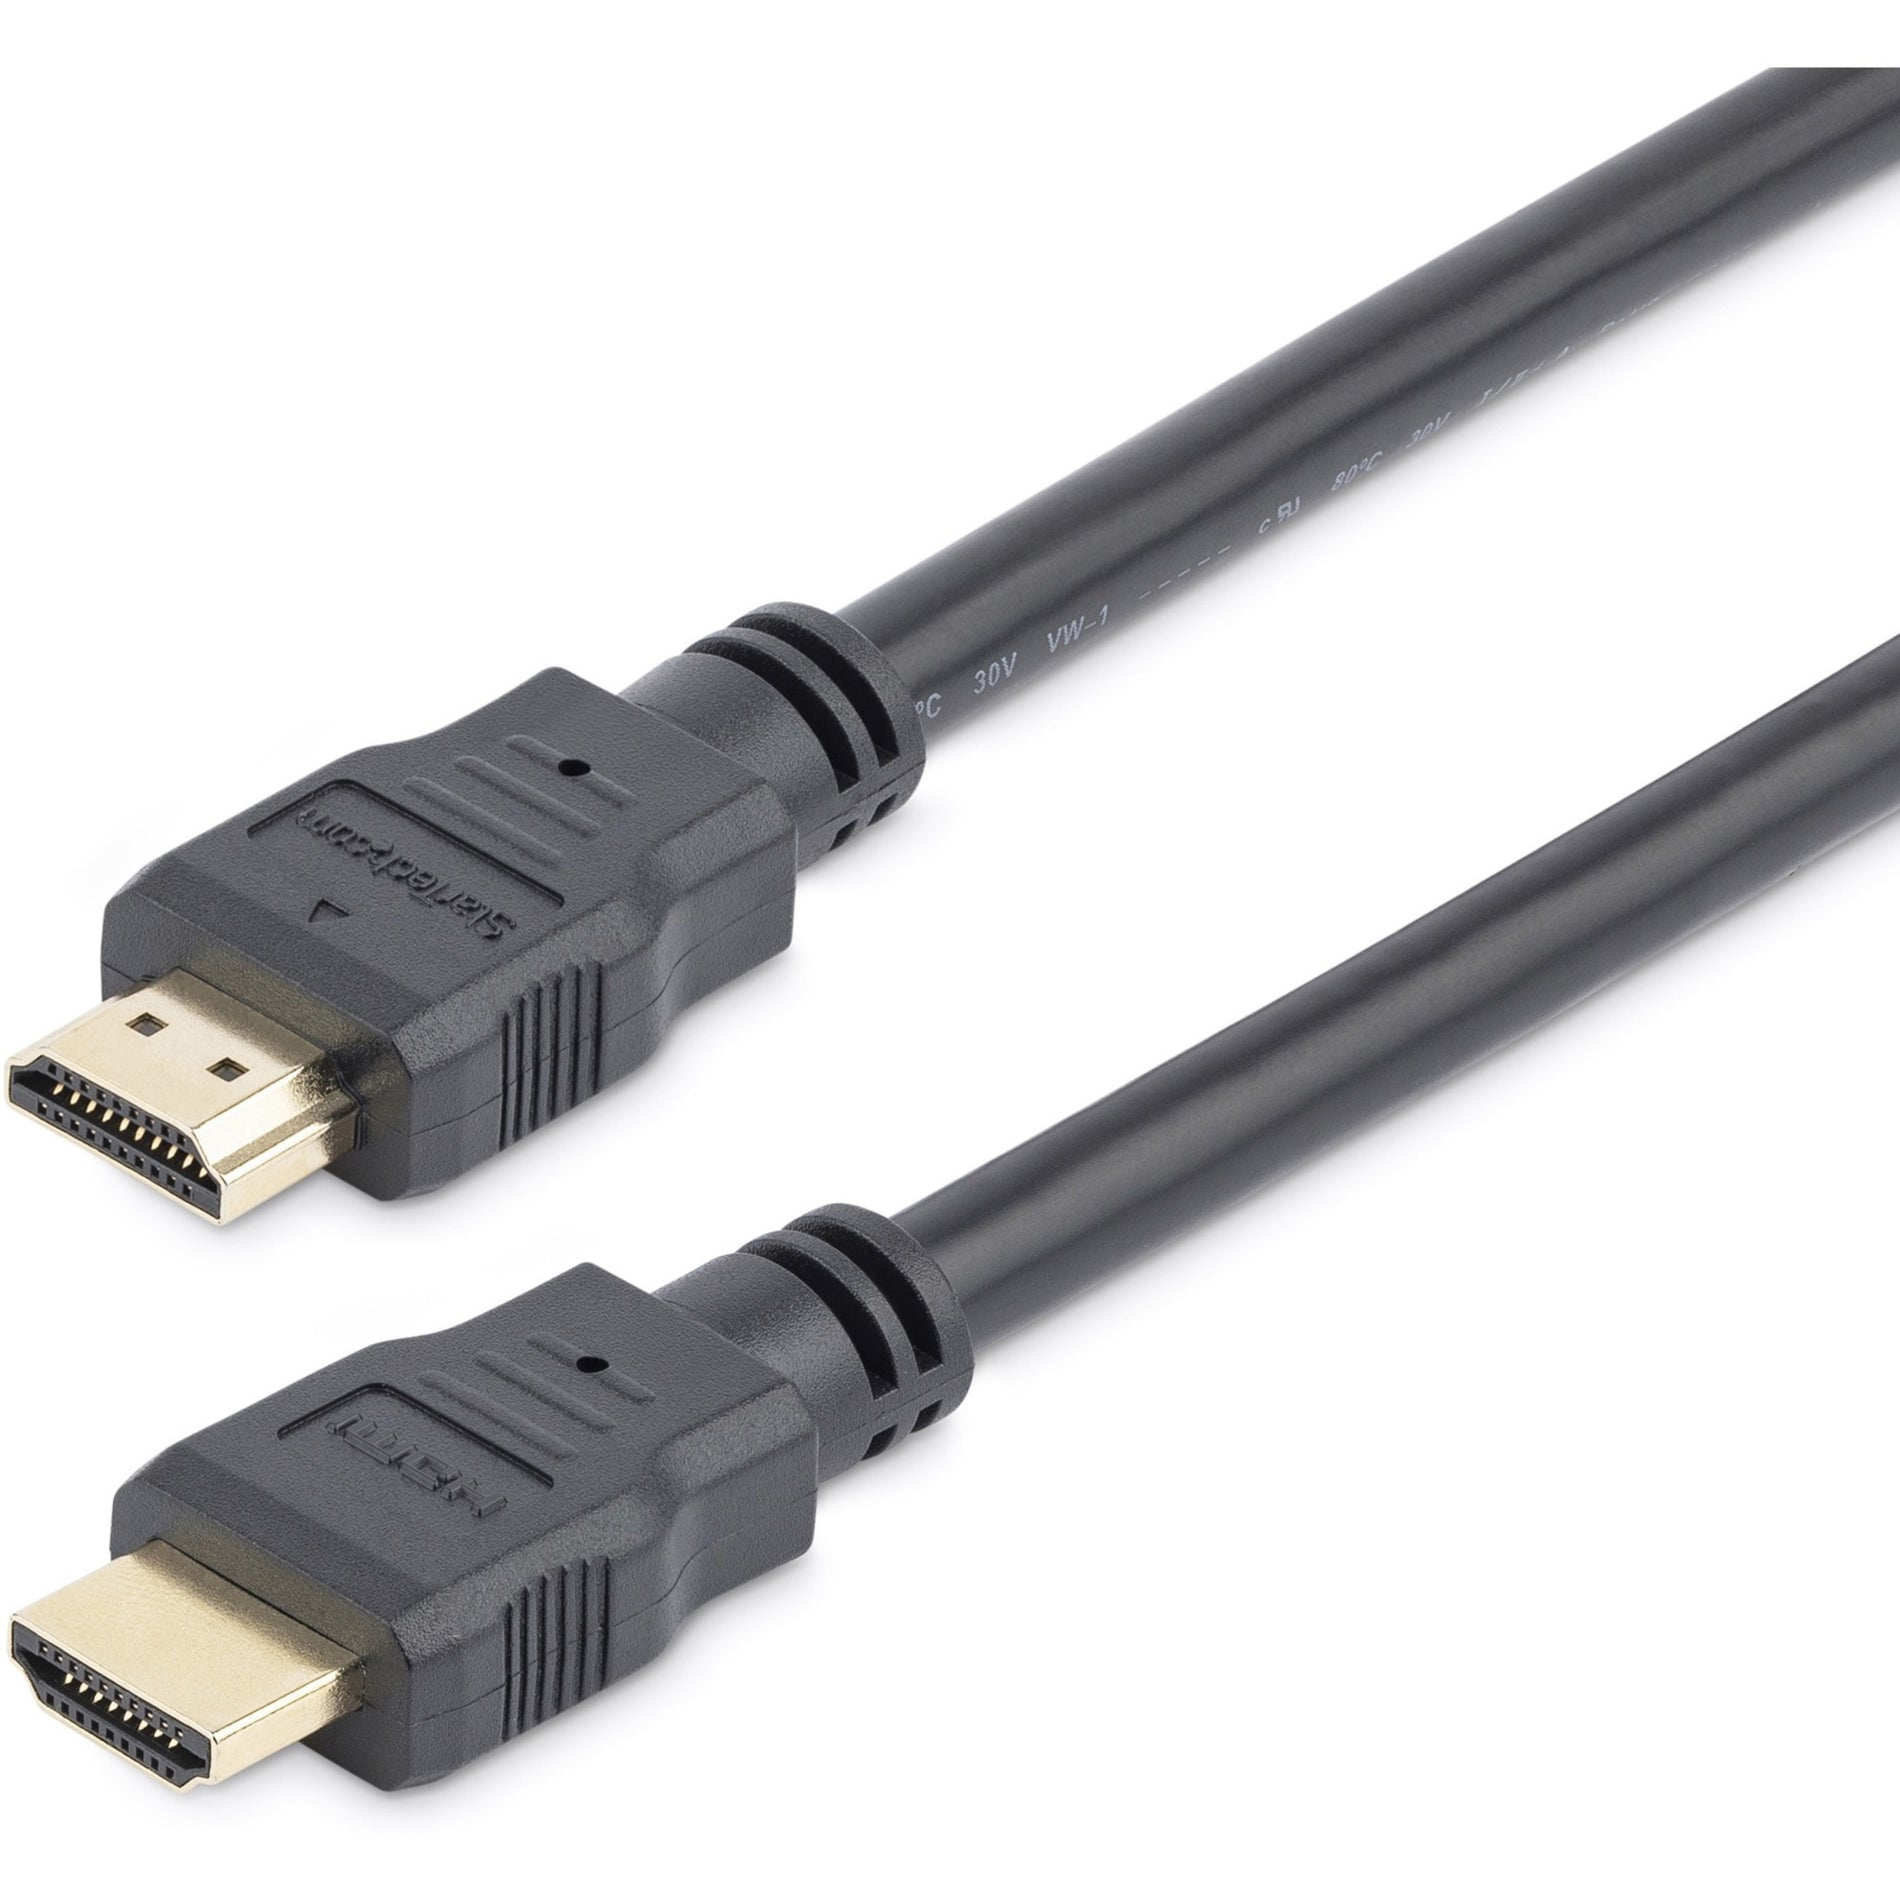 StarTech.com HDMM2M 2m High Speed HDMI Cable - Ultra HD 4k x 2k HDMI Cable, Flexible, Corrosion Resistant, Black